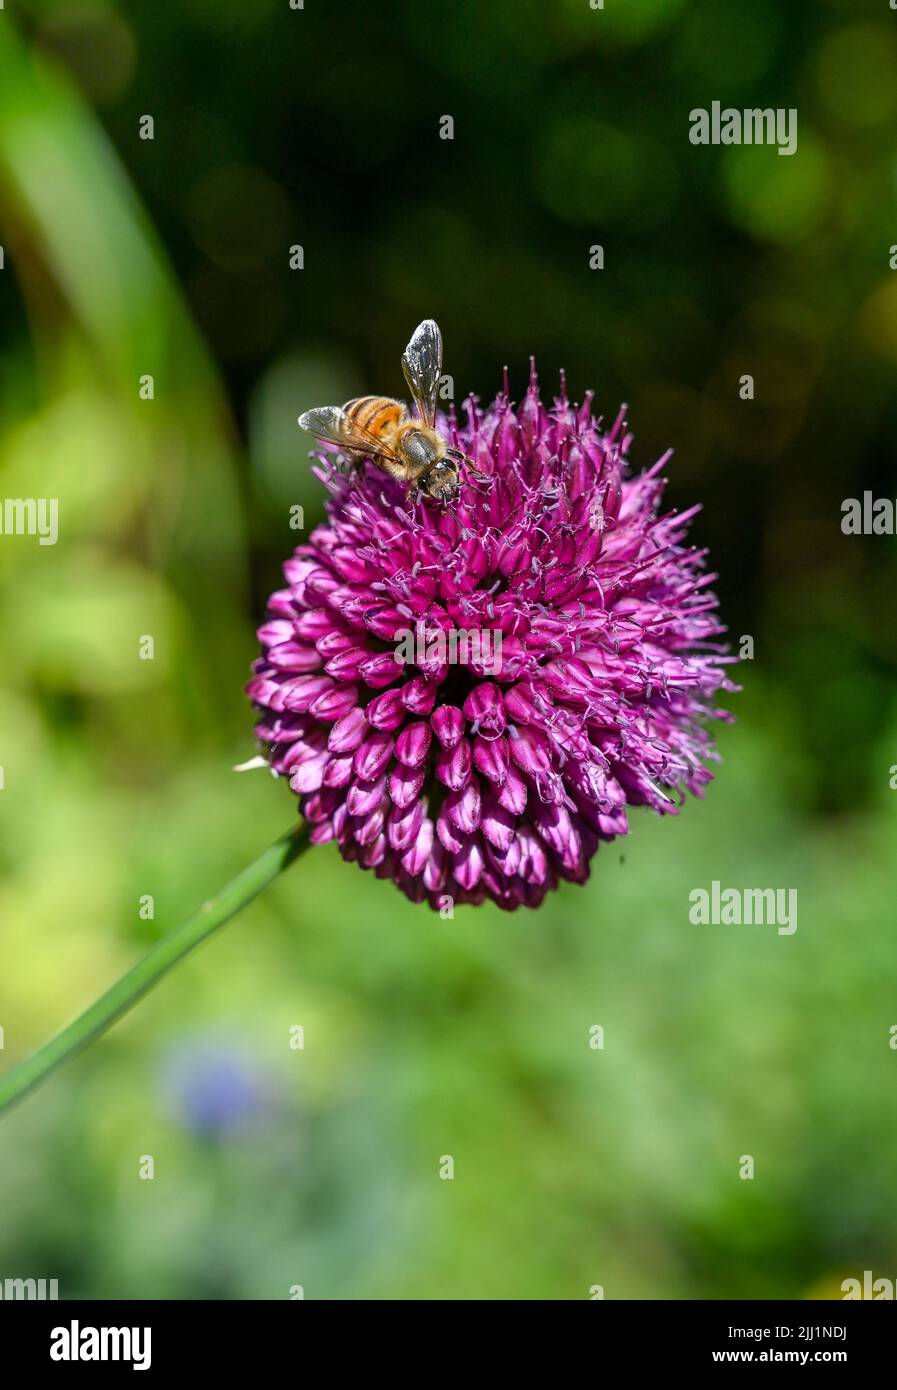 A bee settles on a small purple Allium plant flowering in summer UK - Allium sphaerocephalon, also known as the drumstick allium or round-headed leek Stock Photo